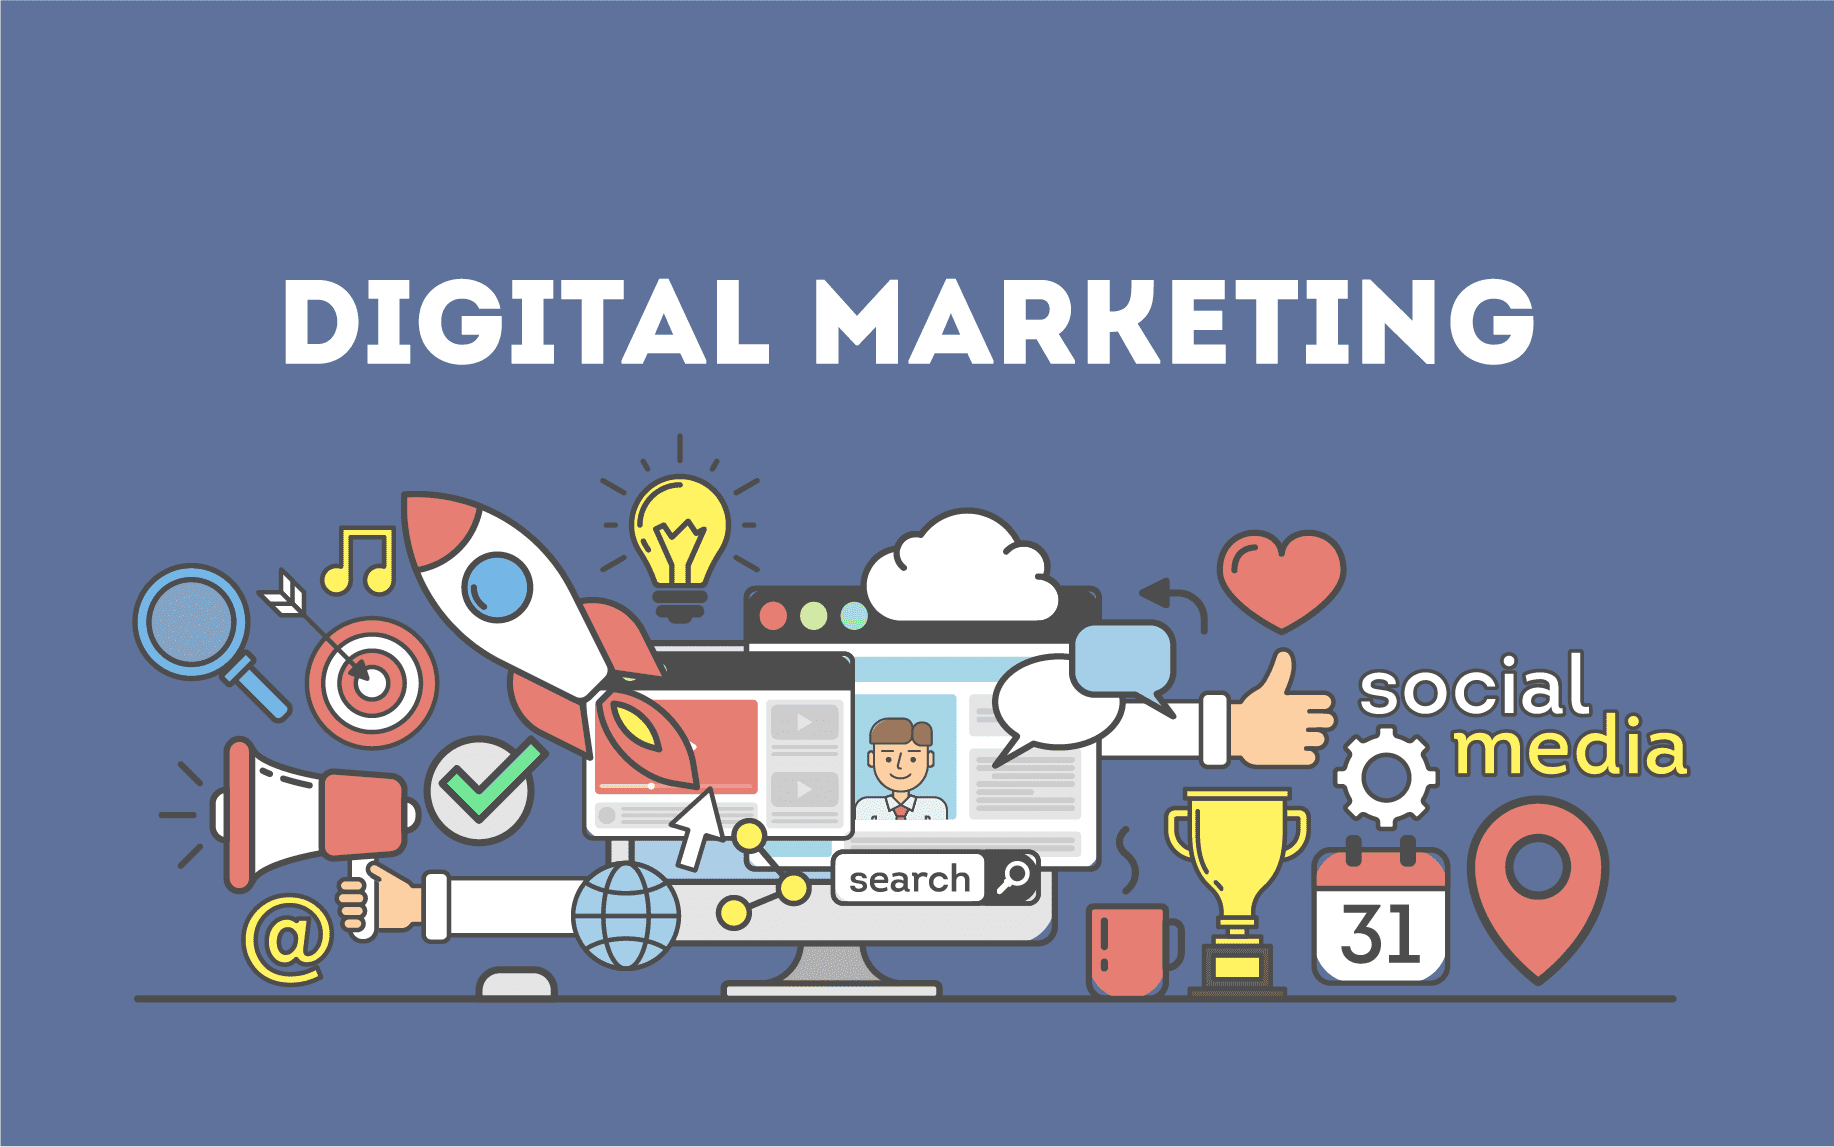 How is digital marketing crucial in today’s world for your company’s growth